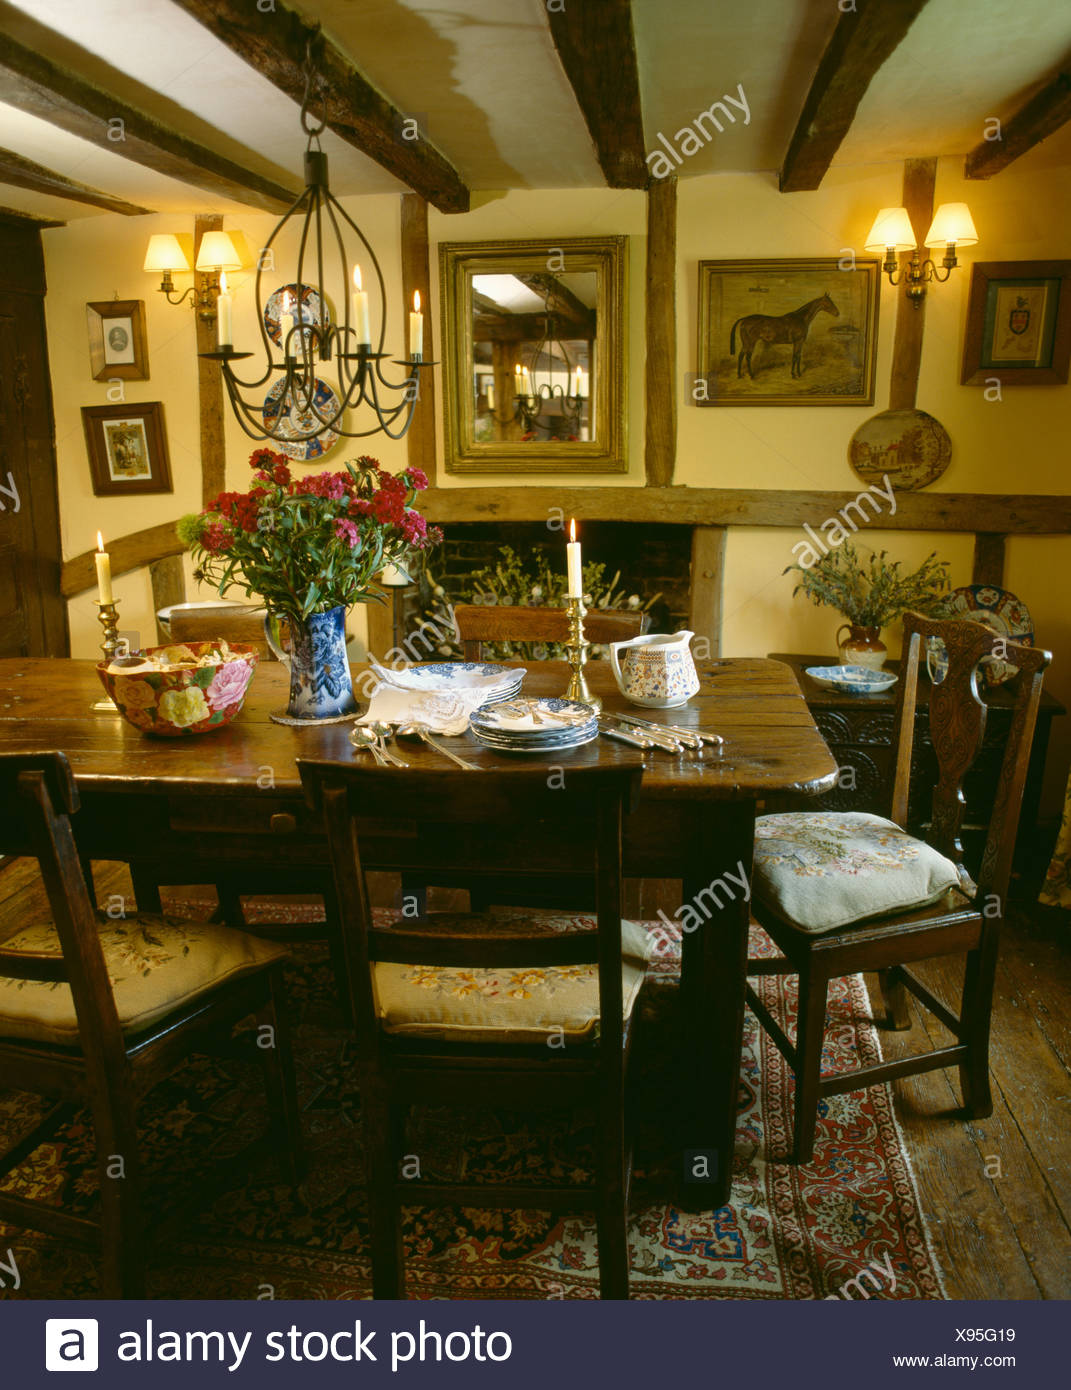 Oak Table And Chairs In Beamed Yellow Cottage Dining Room With